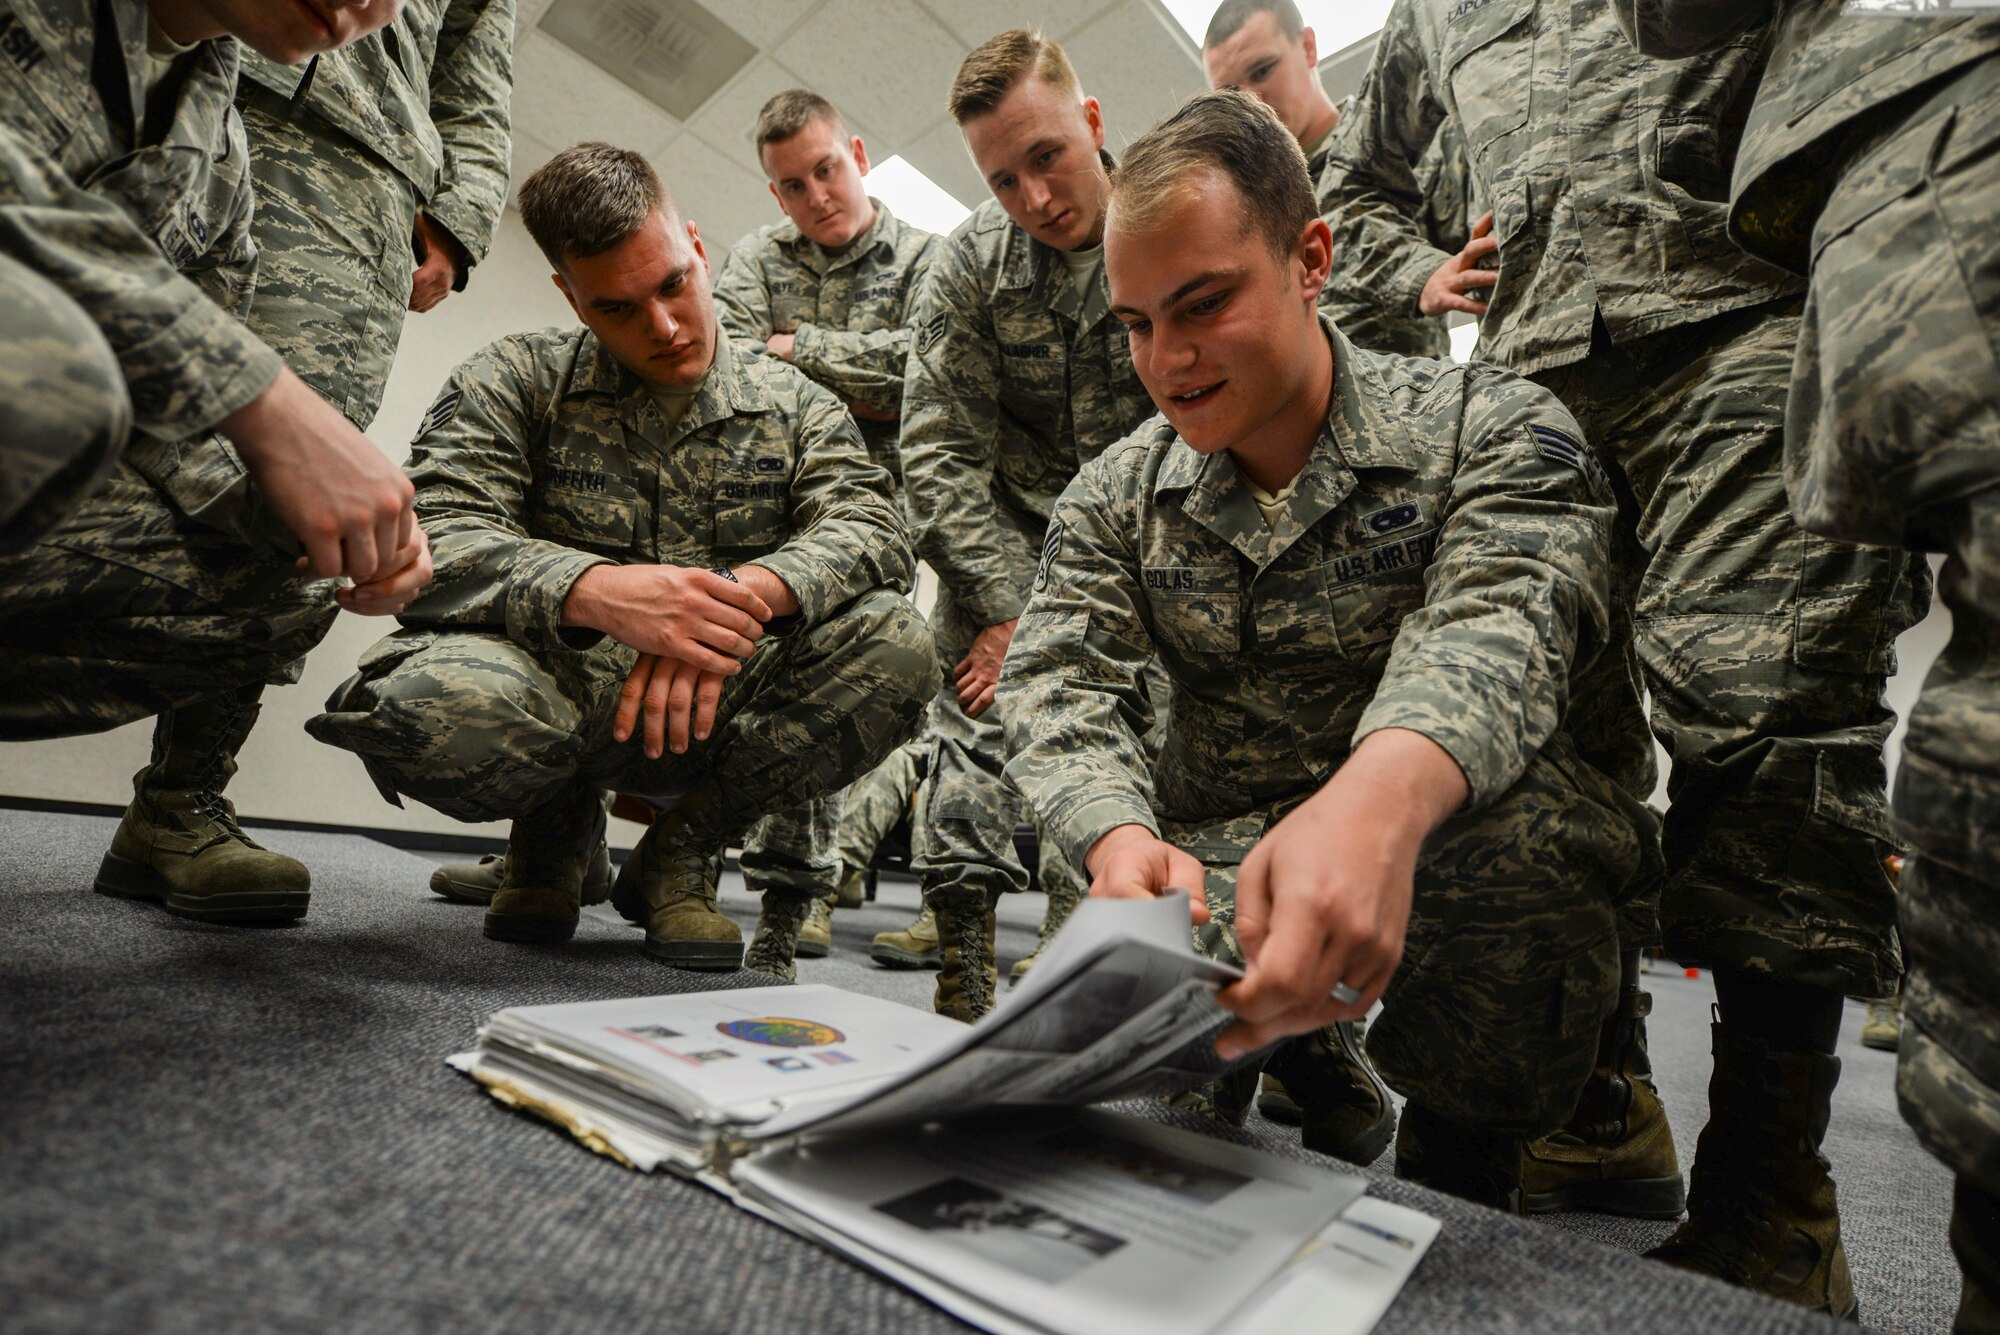 Airmen huddle around a binder full of Air Force heritage pictures and stories inside the Airman Leadership School at Ellsworth Air Force Base, S.D., March 20, 2017. During a presentation by Robert Schilling, a former Airman and gunner on the AC-47 “Spooky” during the Vietnam War, students were able to flip through a binder of information about the aircraft, its crew and what they accomplished. (U.S. Air Force photo by Airman 1st Class Randahl J. Jenson) 